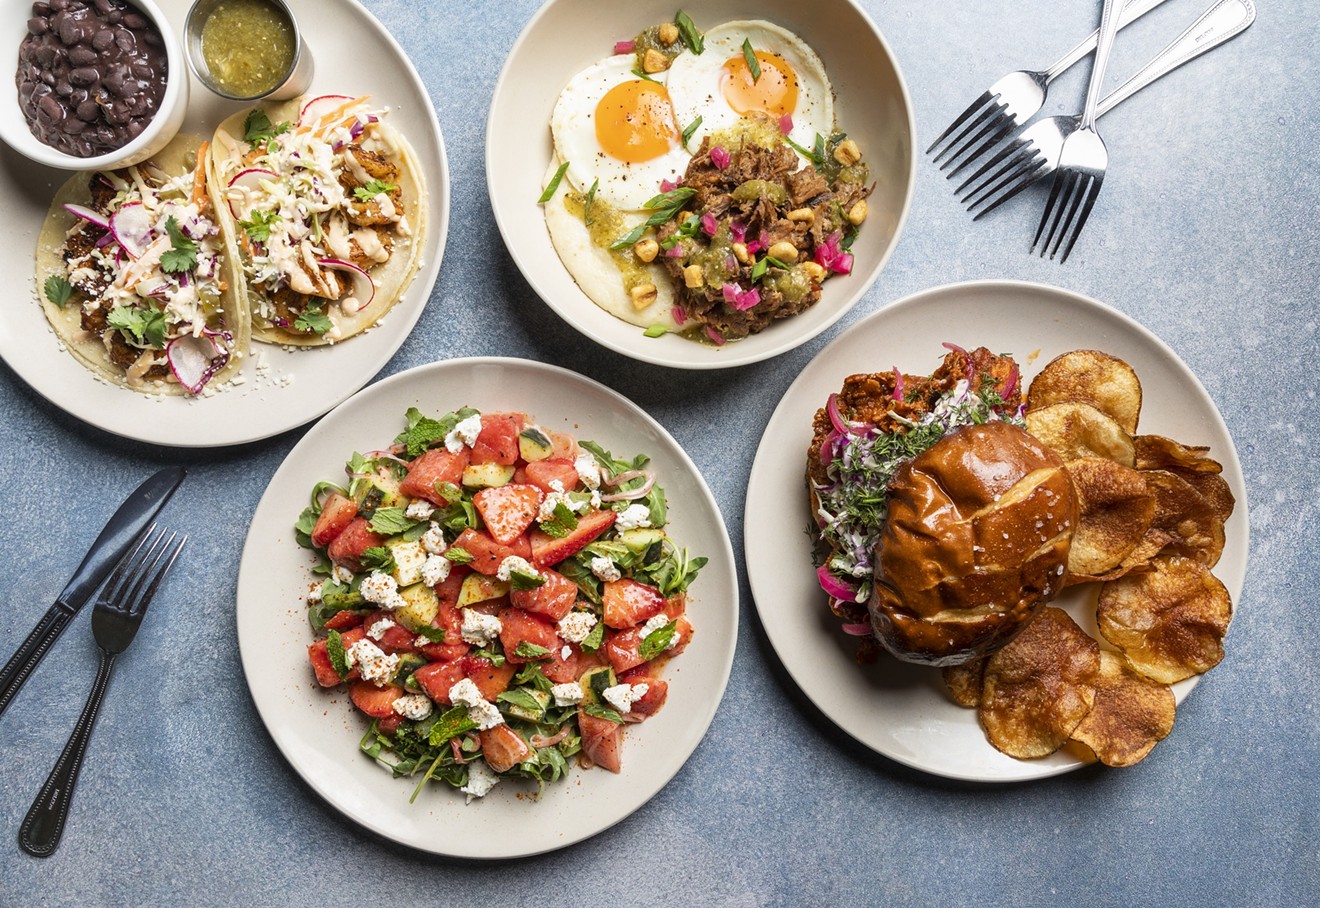 Dish Society celebrates Memorial Day with Monday brunch and its daily 20 percent discount for for all military, first responders, police and fire personnel.